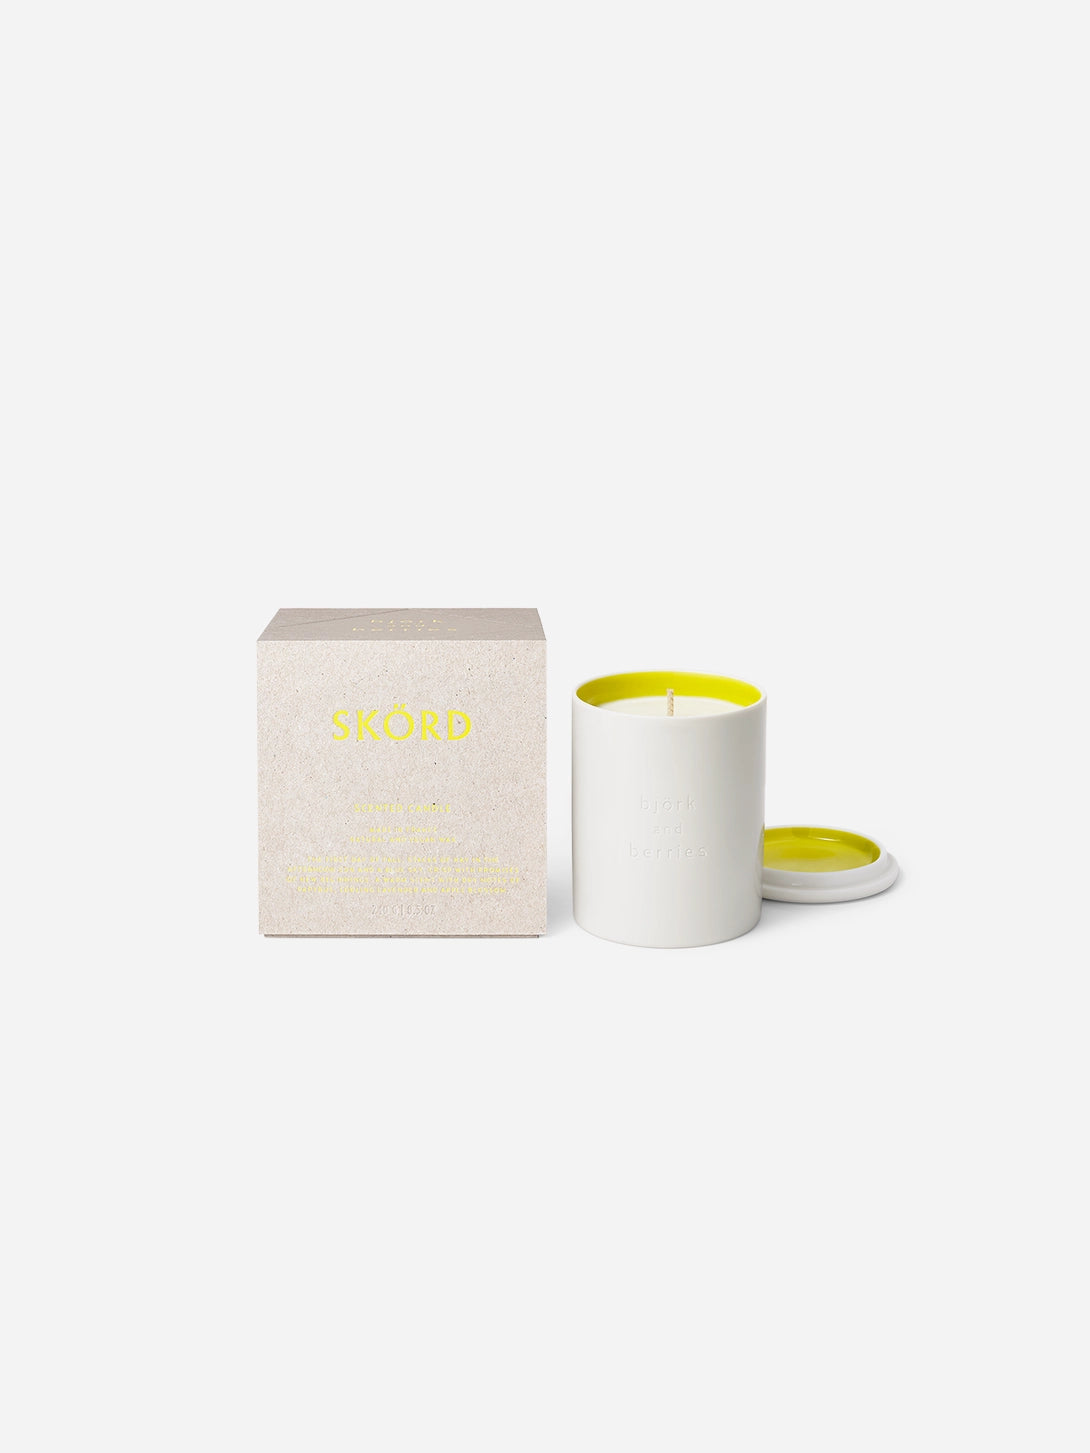 Skord Scented Candle by Bjork and Berries